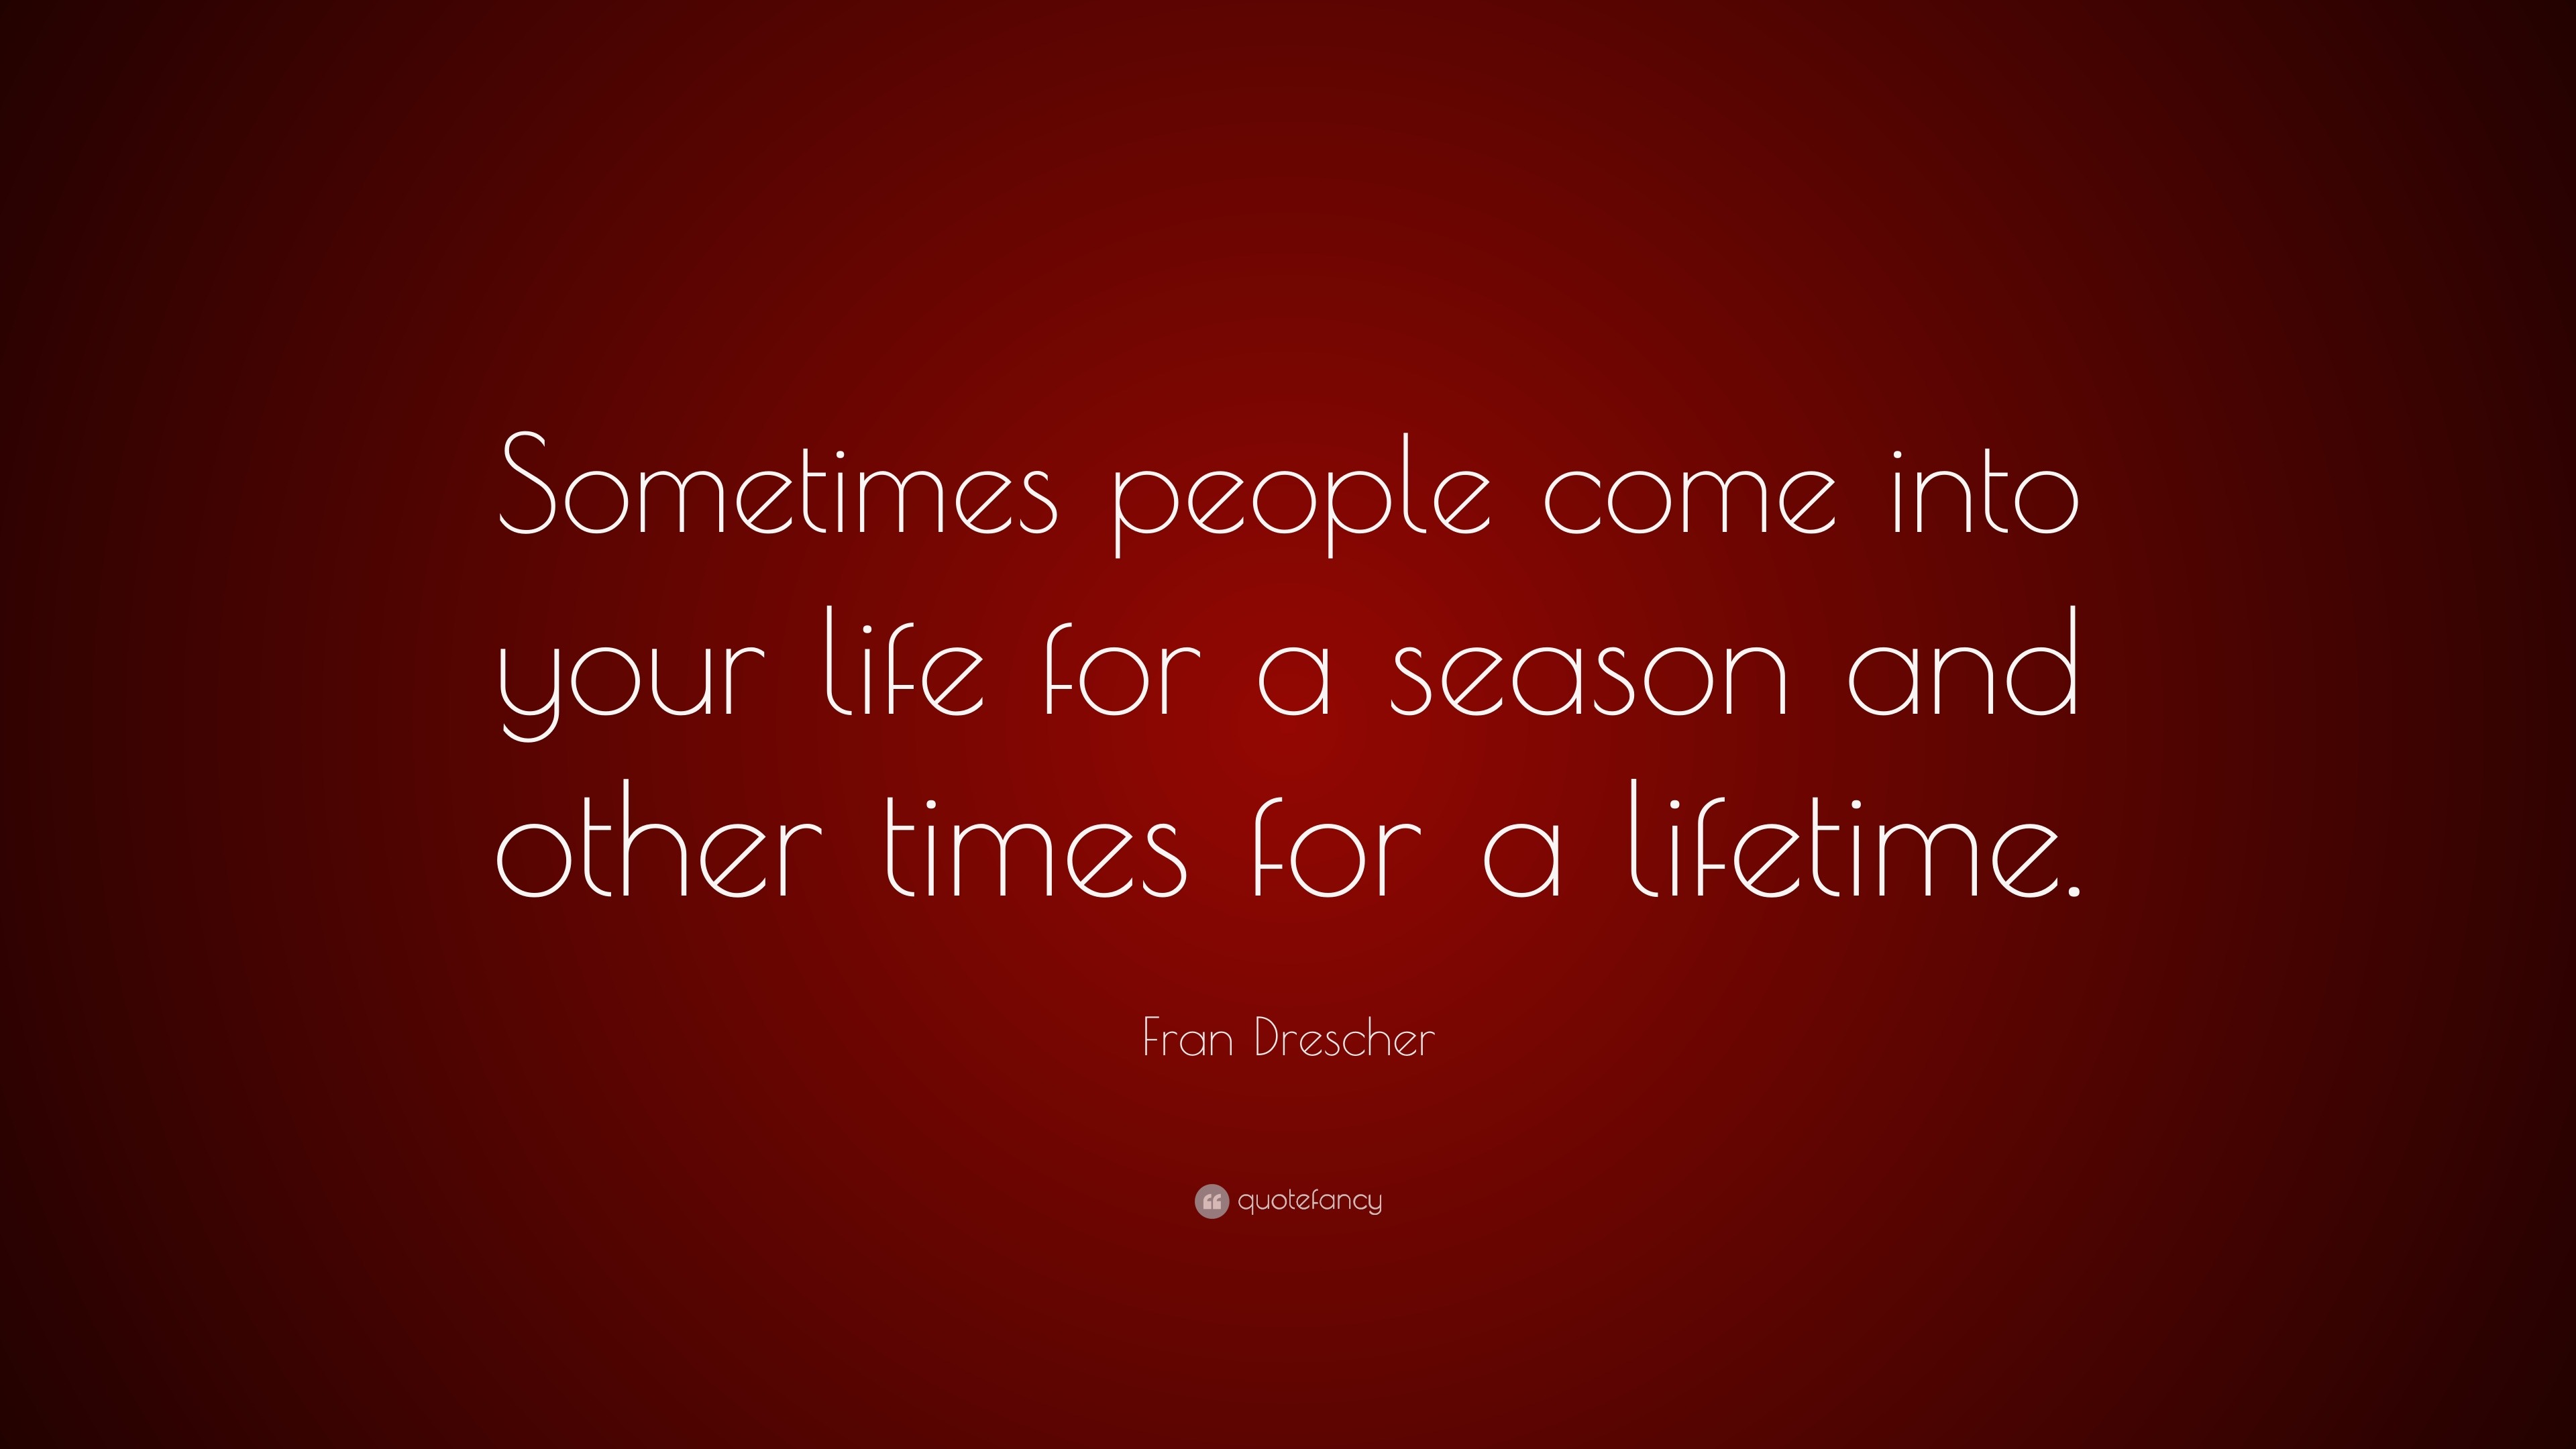 Fran Drescher Quote “Sometimes people e into your life for a season and other